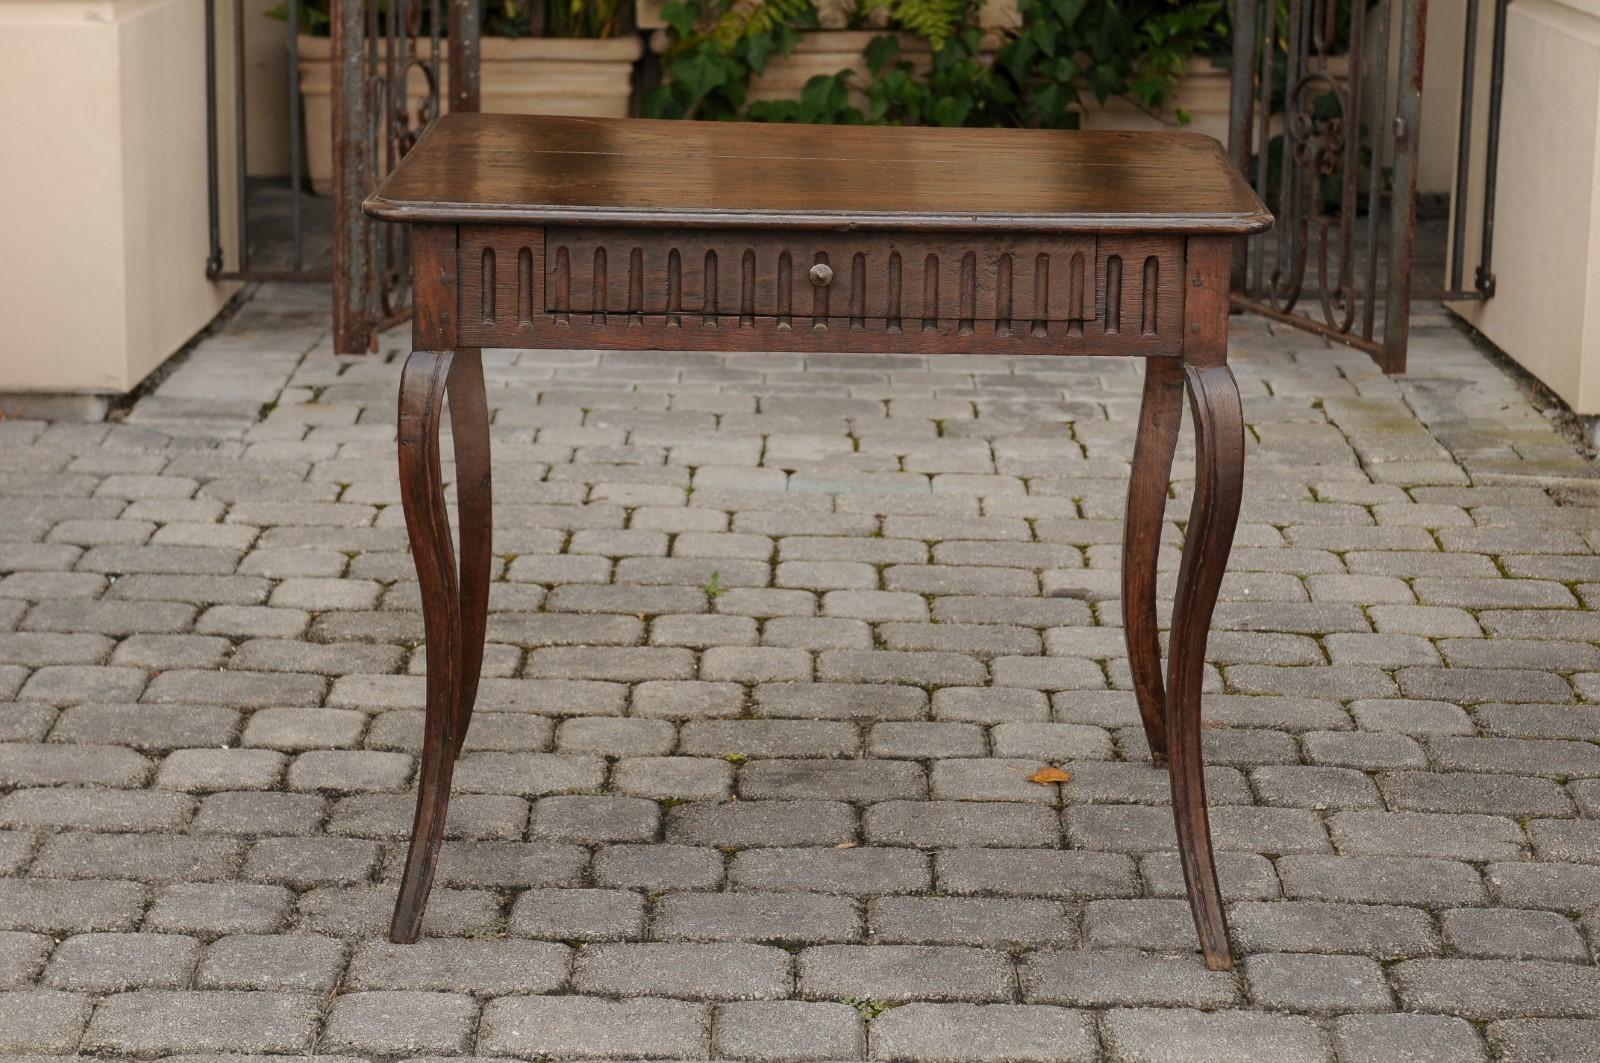 A French chestnut and oak table from the third quarter of the 19th century, with single drawer and cabriole legs. Born at the end of the reign of France's last Emperor Napoleon III, this oak and chestnut table features a rectangular planked top with